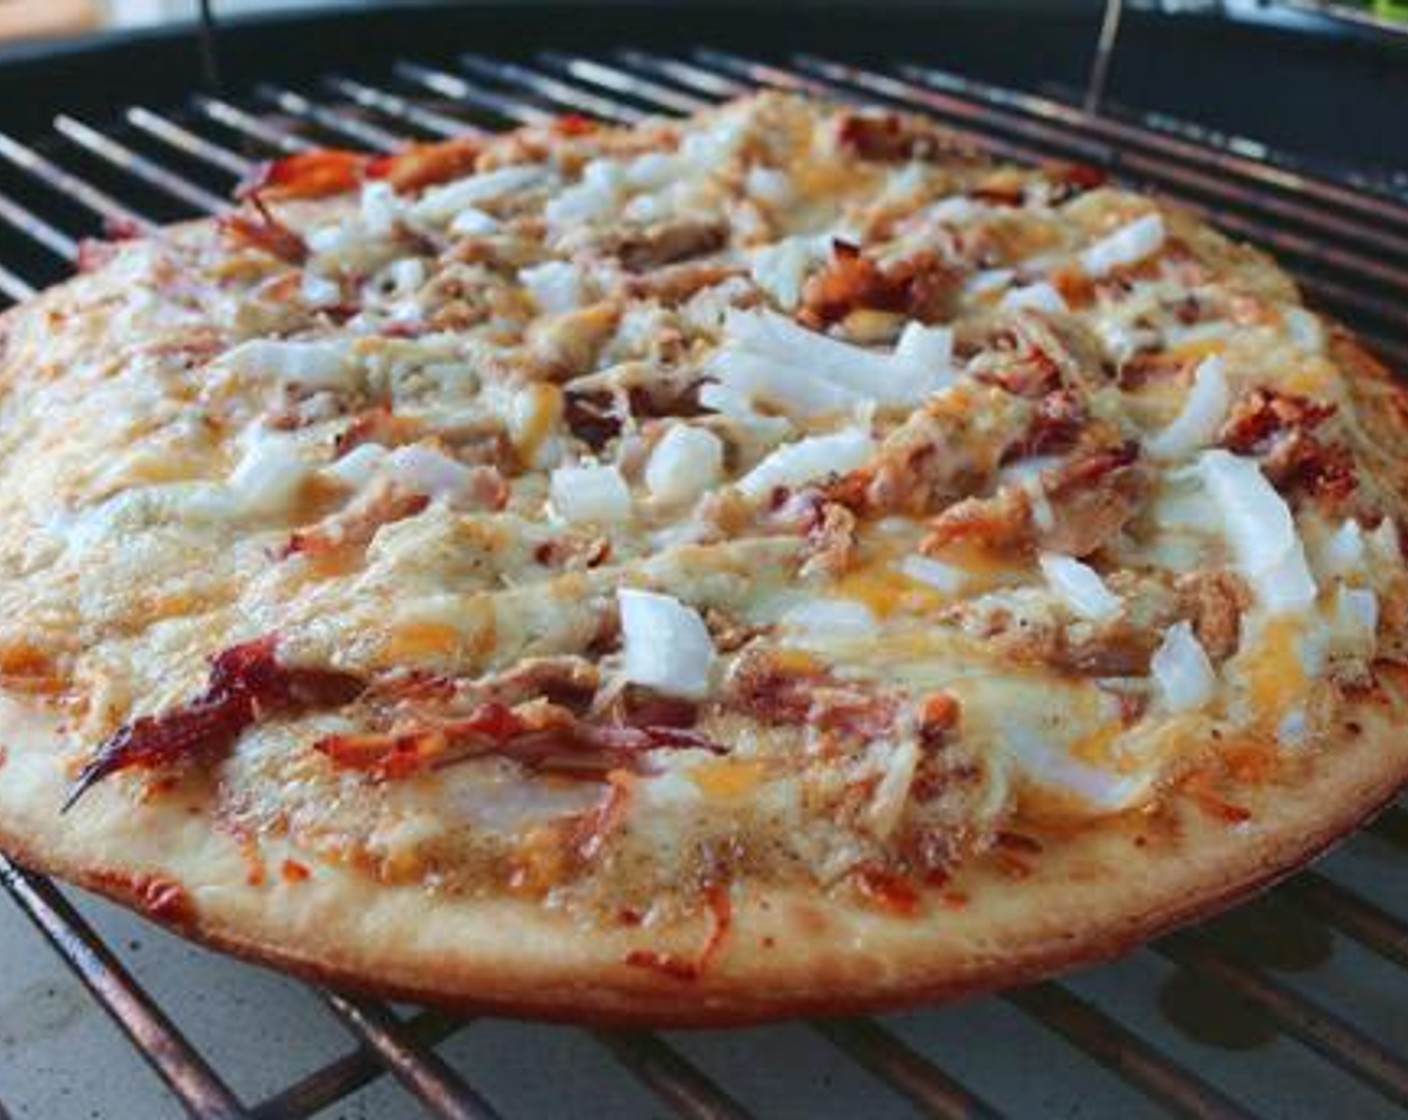 step 5 Use a pizza peel or cutting board to transfer pizza to the grill. Cook each pizza separately for 8-10 minutes or until cheese is melted and crust is brown.